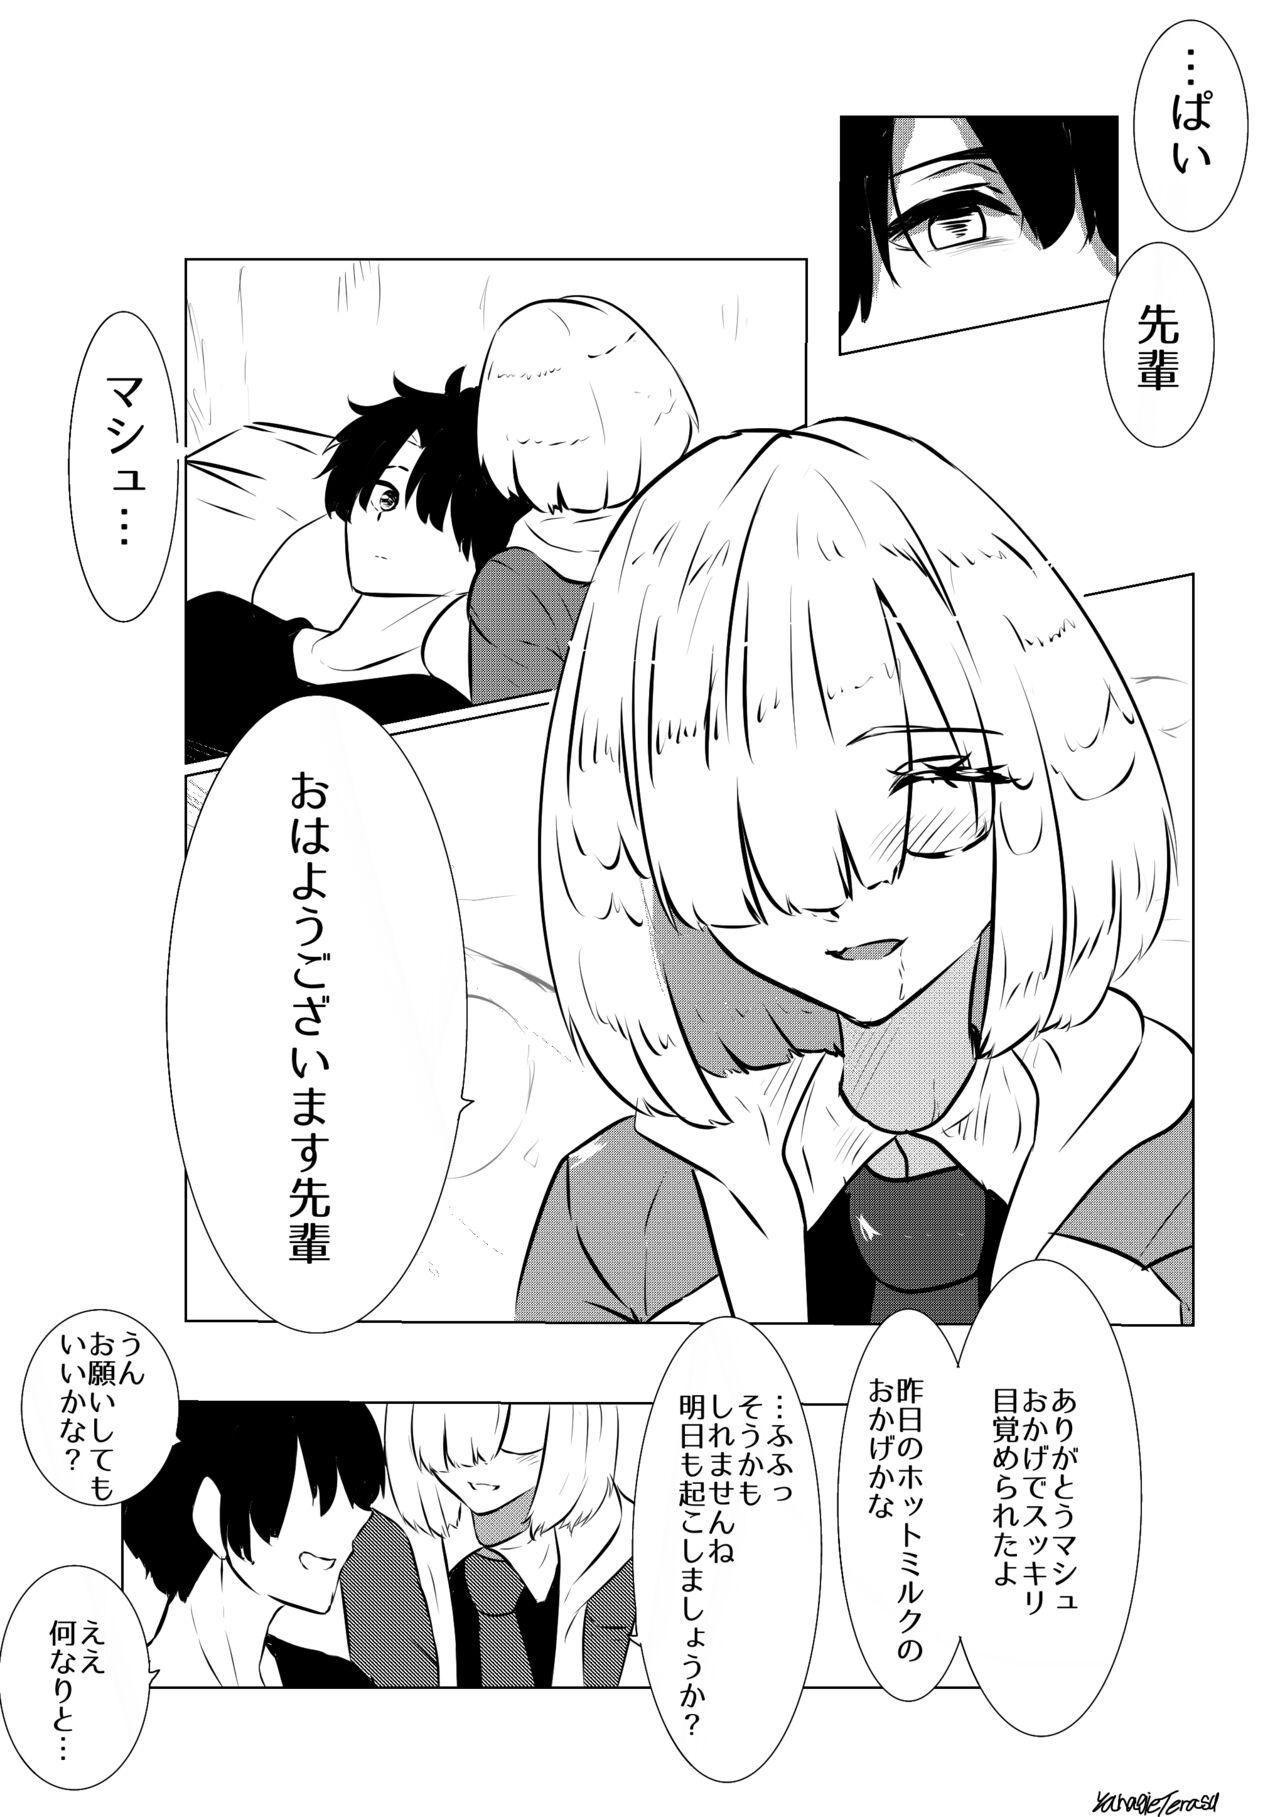 Passionate マシュの早朝ご奉仕 - Fate grand order Amatuer Porn - Page 4